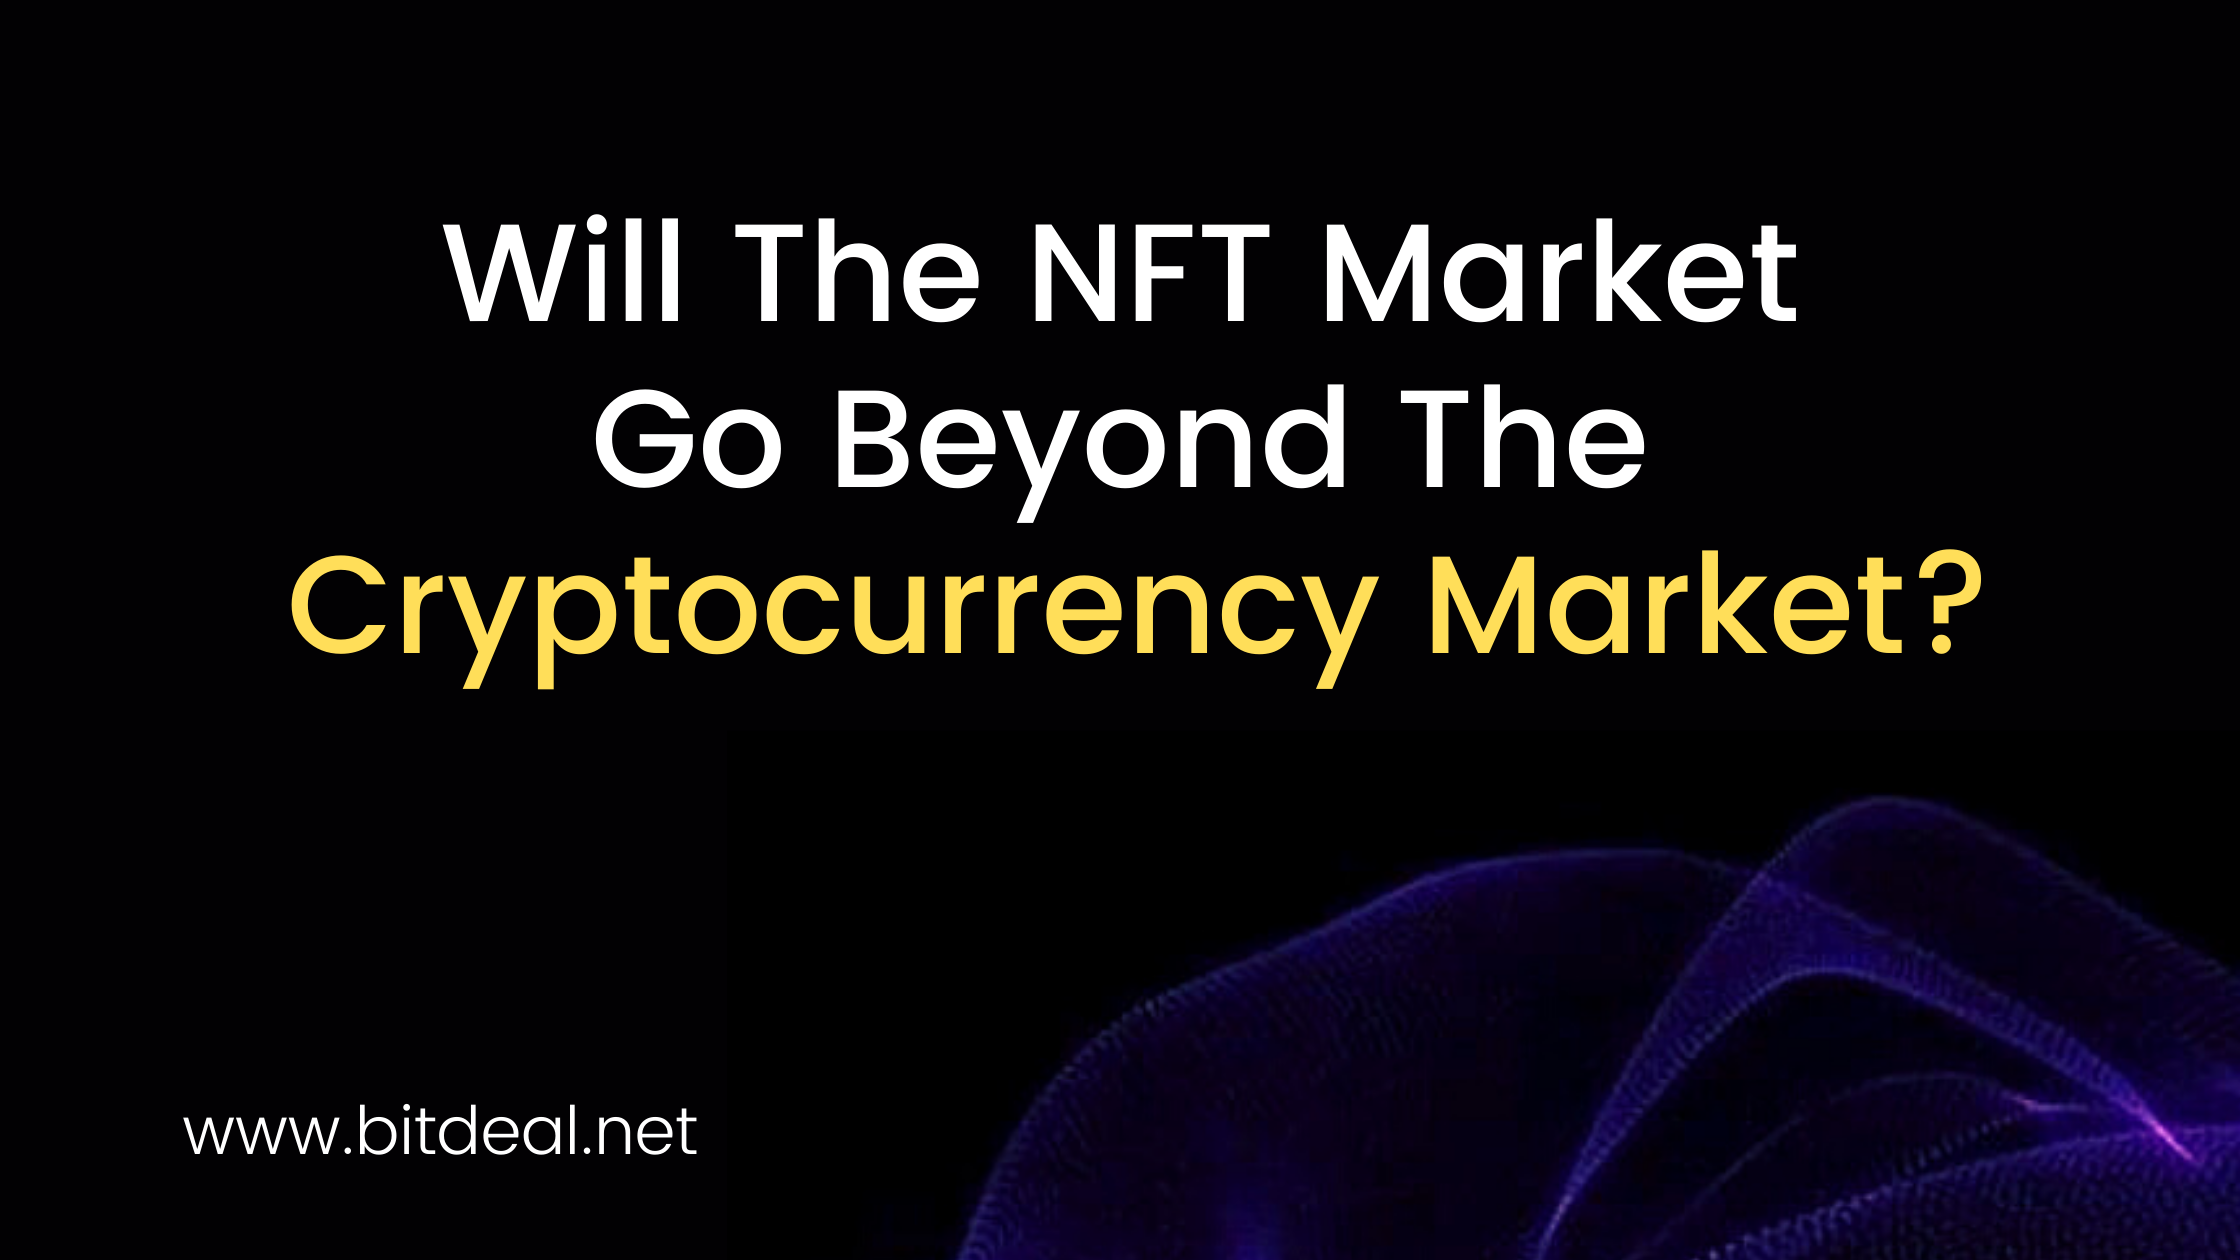 Article about Will the NFT Market raises above the Crypto Market 